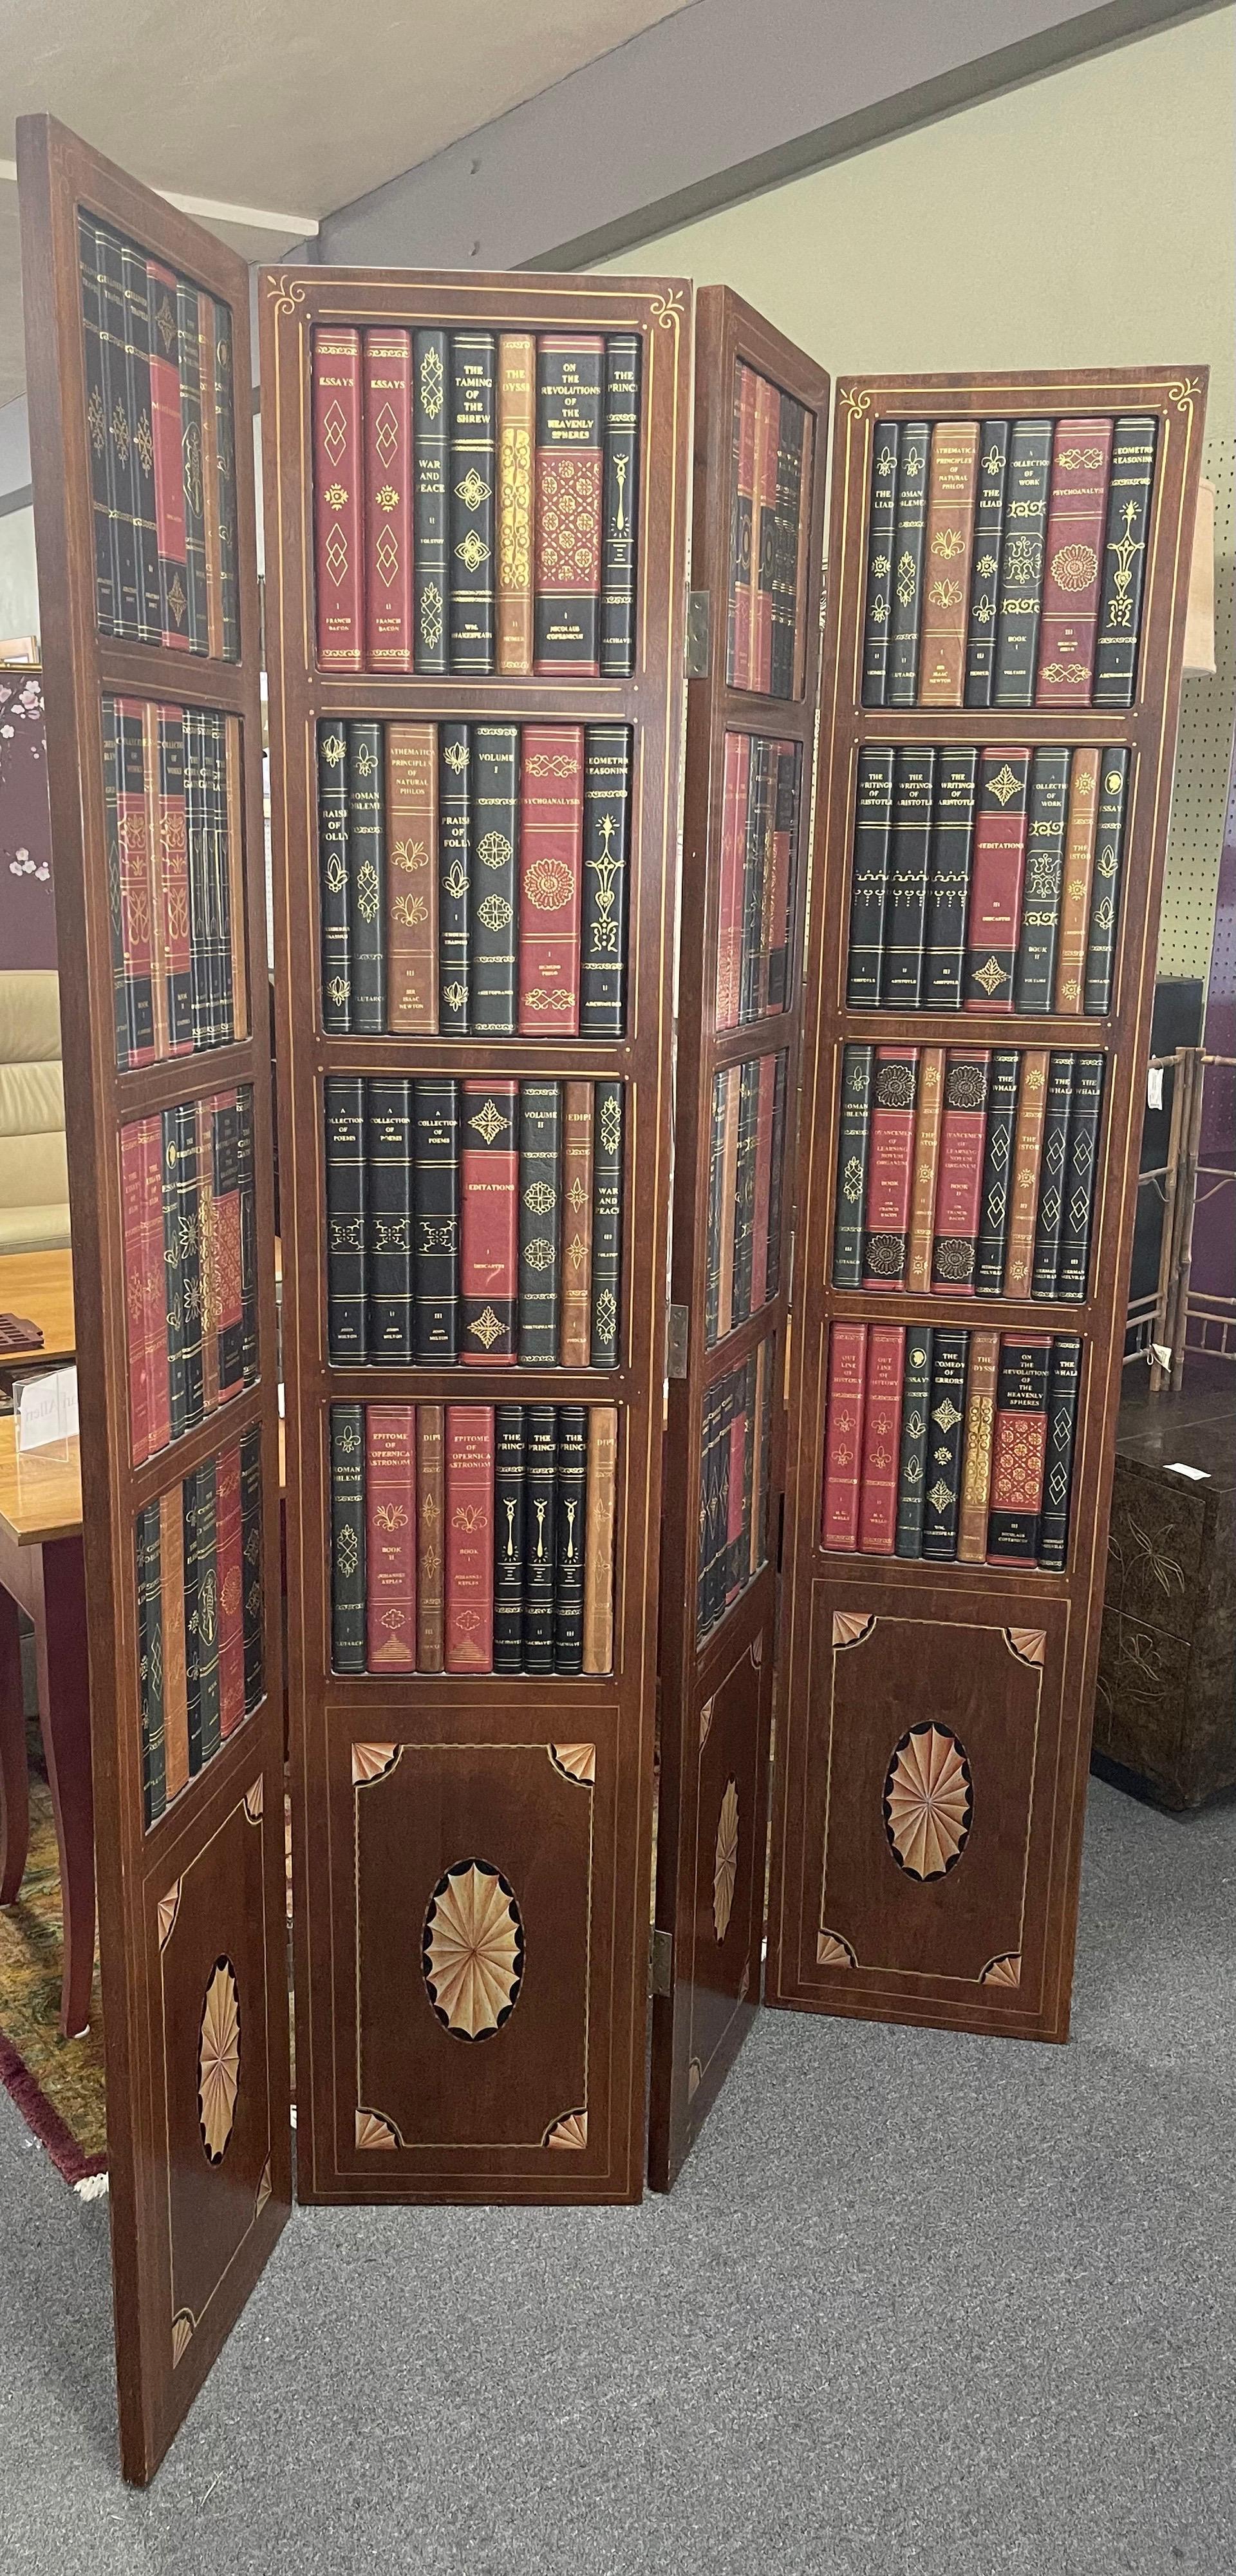 Hollywood Regency Leather Bound Library Book Four-Panel Folding Screen by Maitland Smith